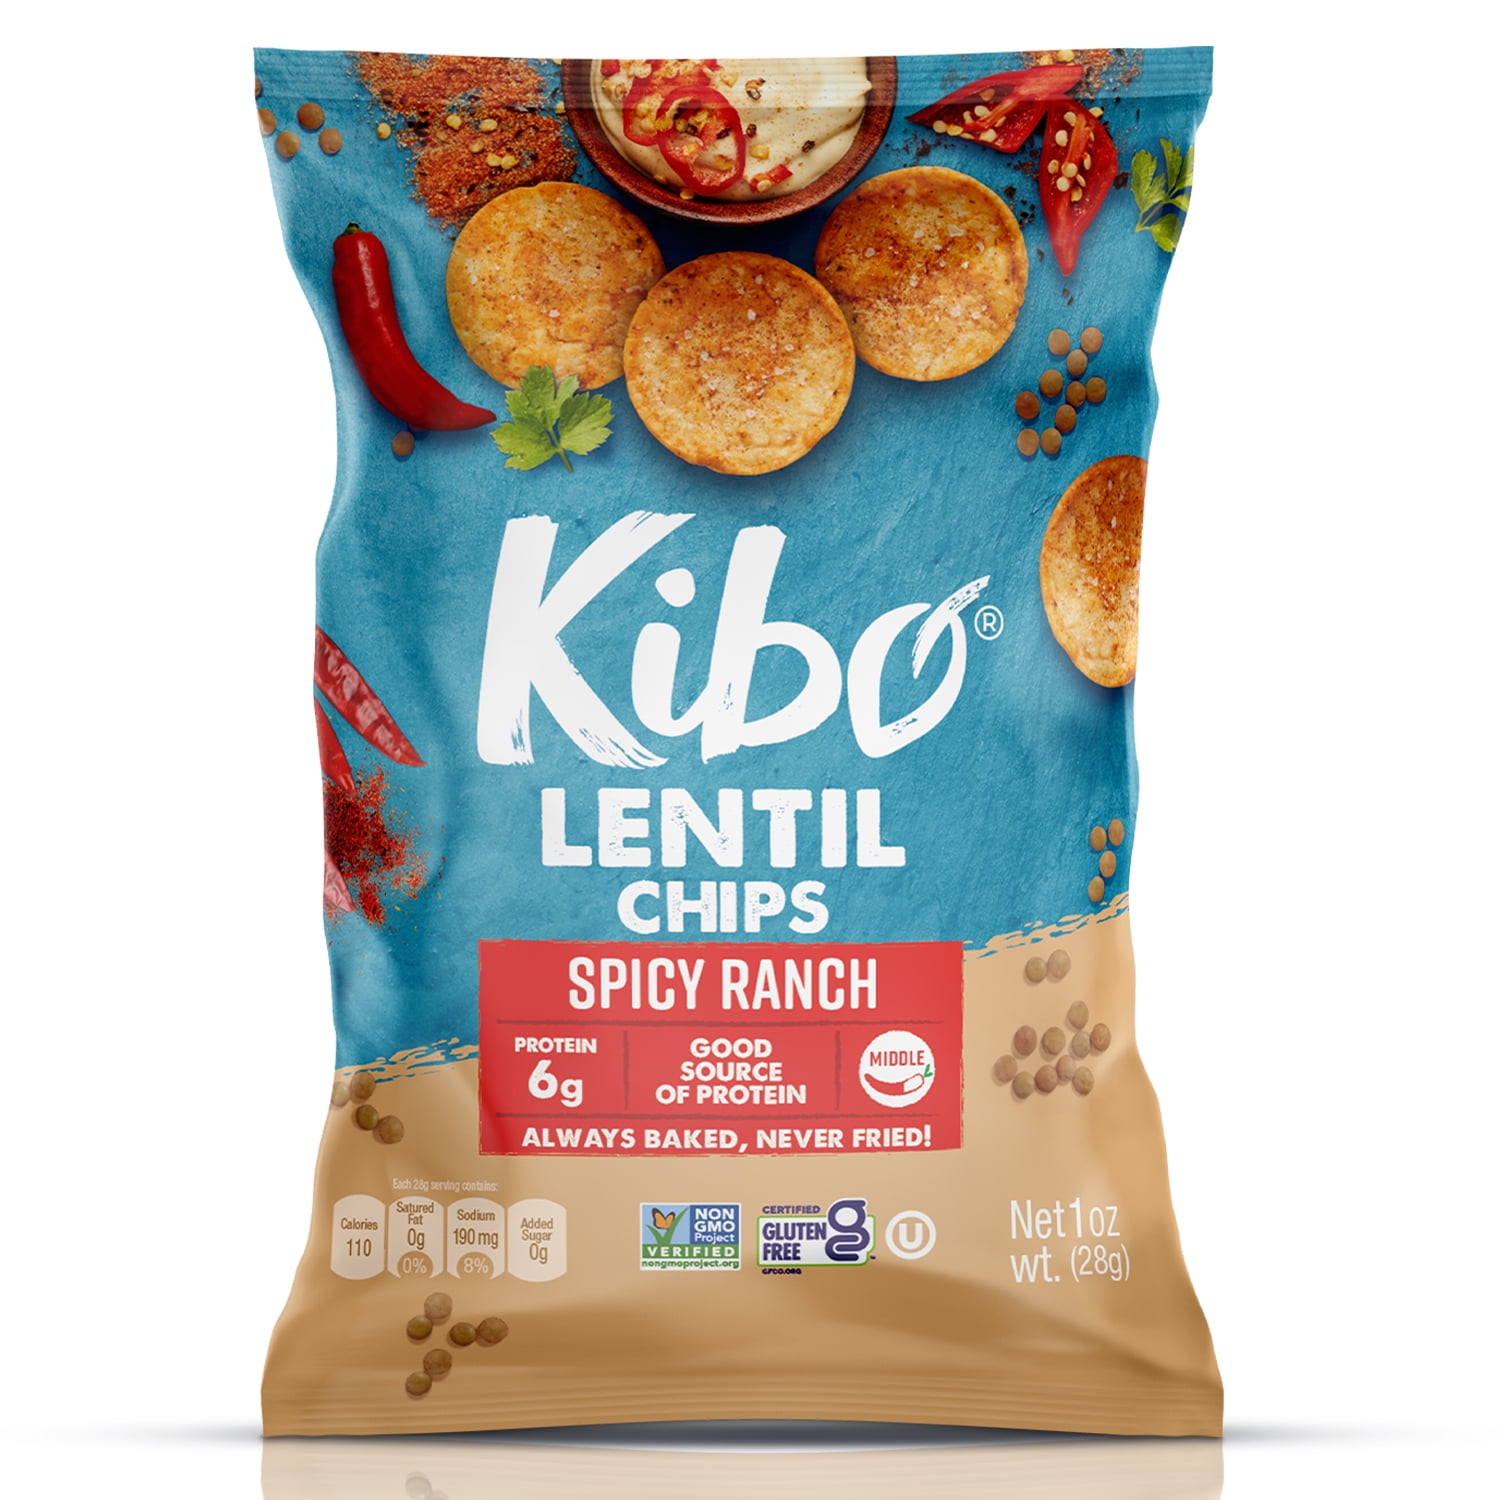 12-Pack Spicy Ranch Lentil Chips | Preservative-Free & Healthy For High Protein, Plant-Based, Vegan Snacks, Non-GMO, Kosher 1oz Bags Walmart.com